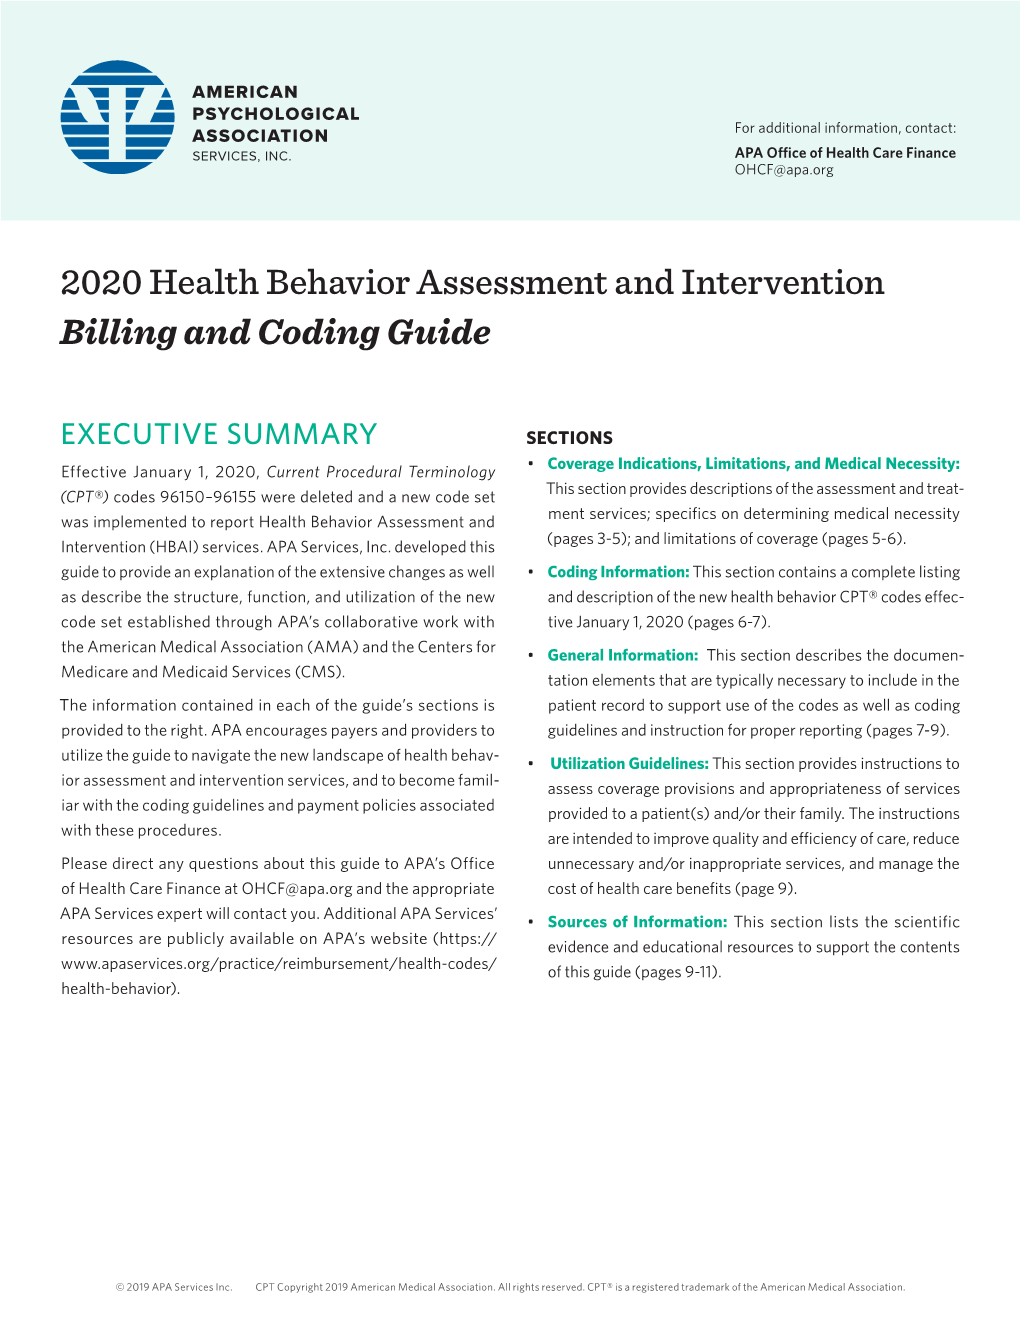 2020 Health Behavior Assessment and Intervention Billing and Coding Guide